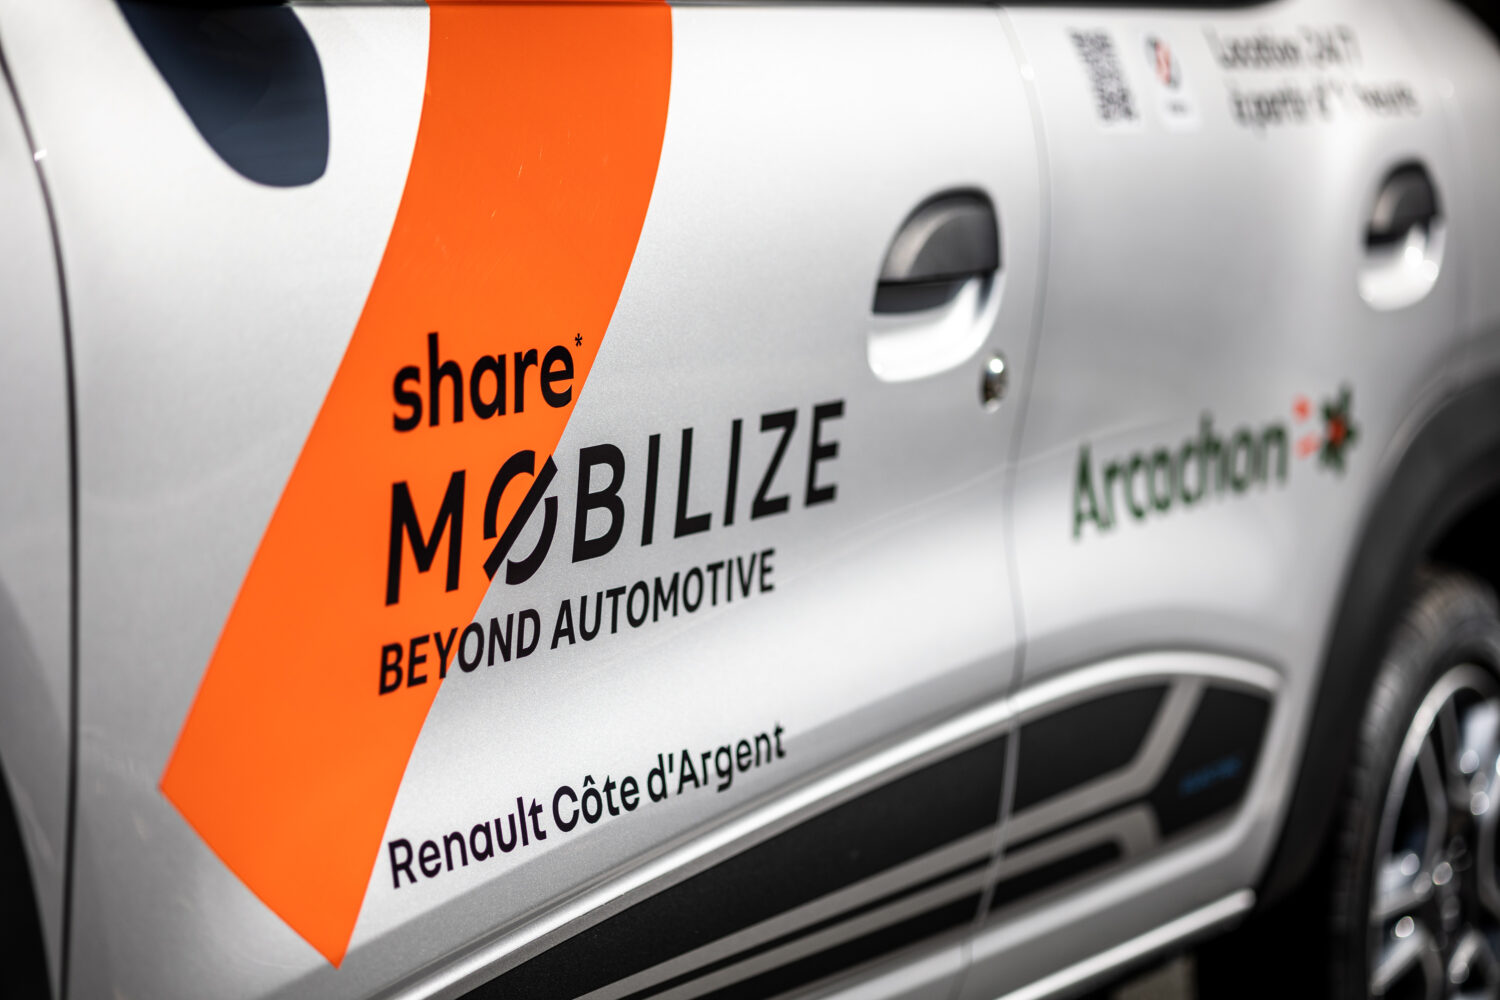 2021 - Mobilize Share in Arcachon (France)